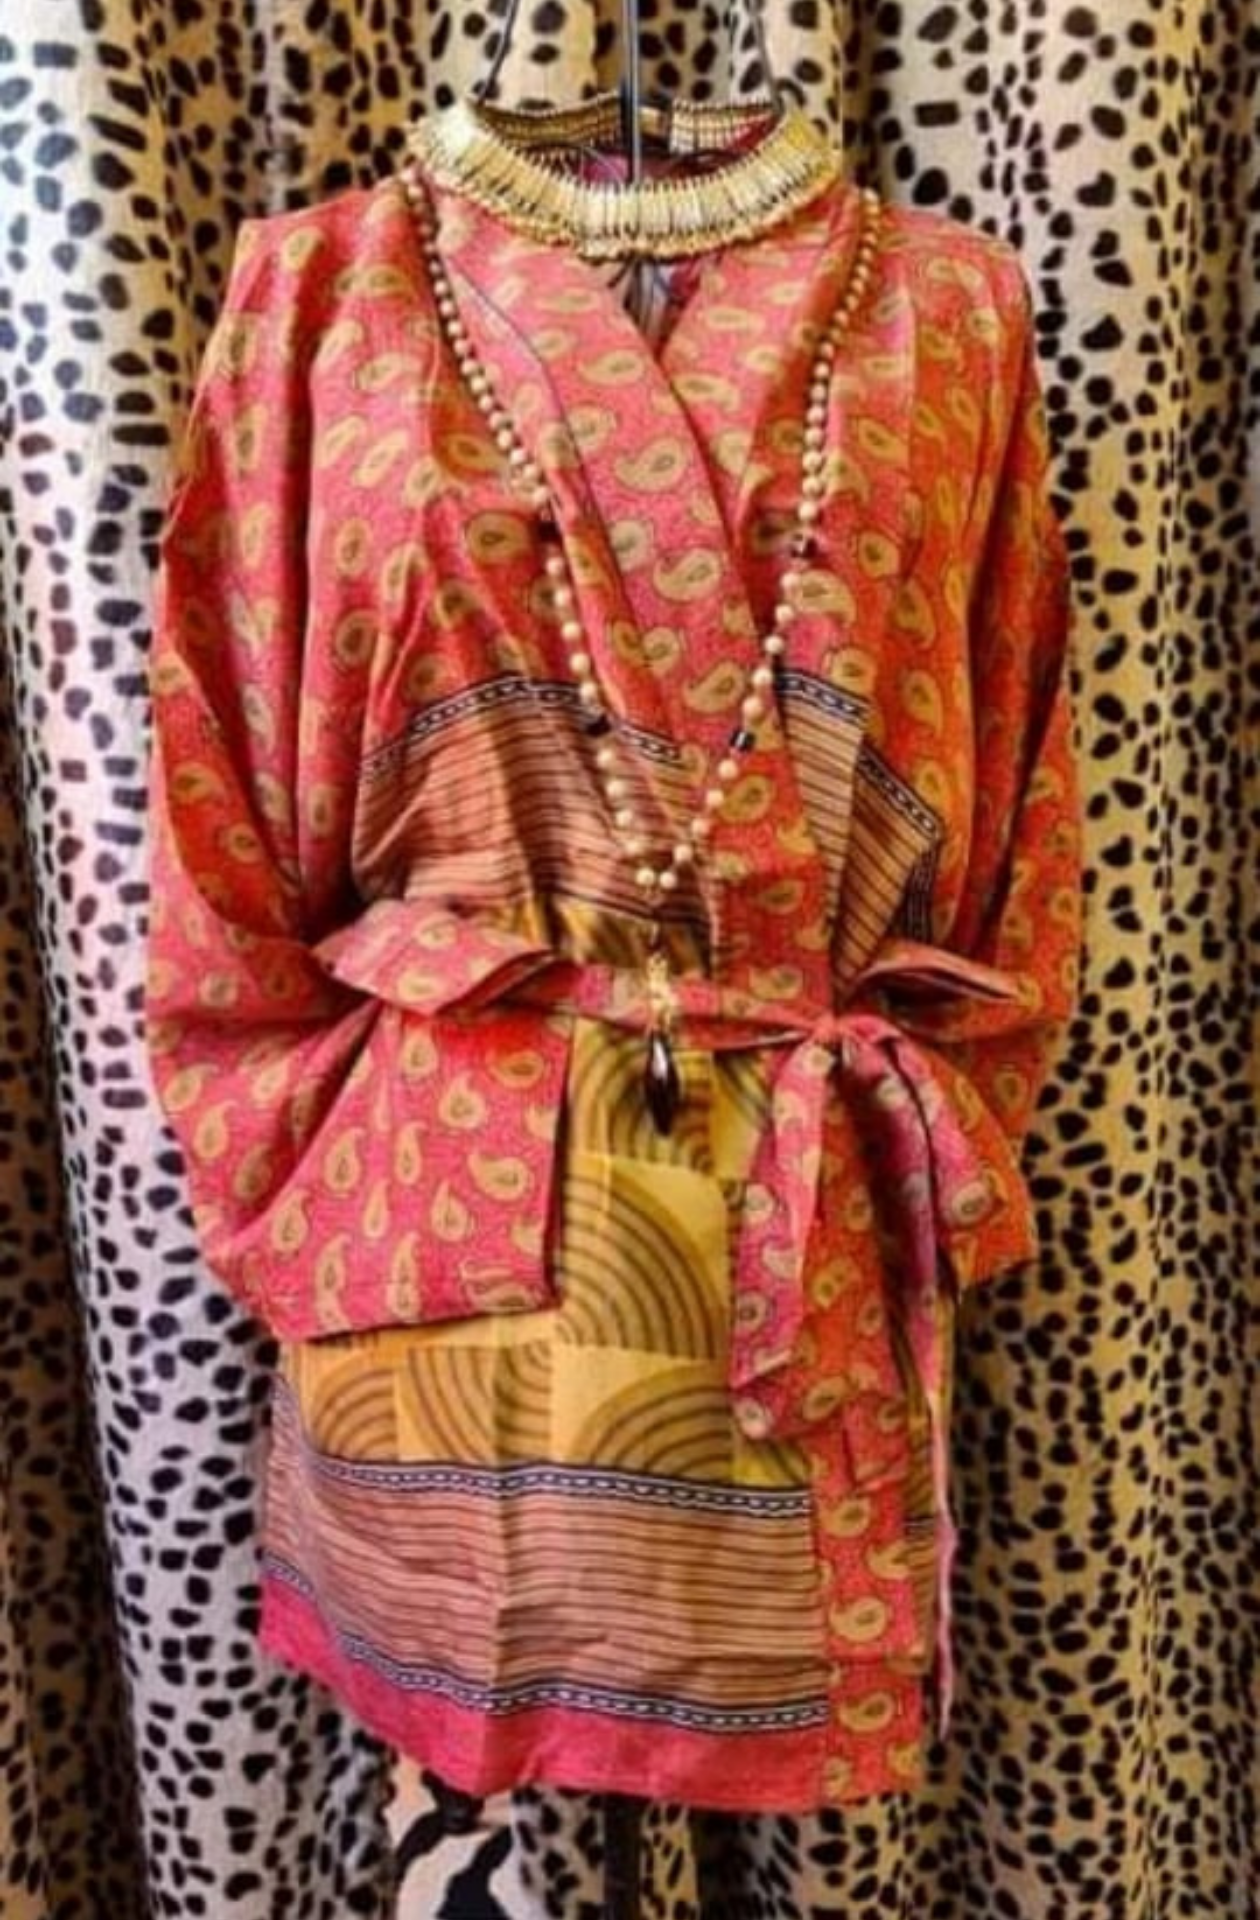 vintage sari silk kimono jacket displayed on a wire mannequin. The jacket is mostly and orange/salmon colour with a paisley yellow print. The bottom, half of the jacket appears more like a traditional japanese print with a variety of different line patterns and geometric circles in yellow and blue